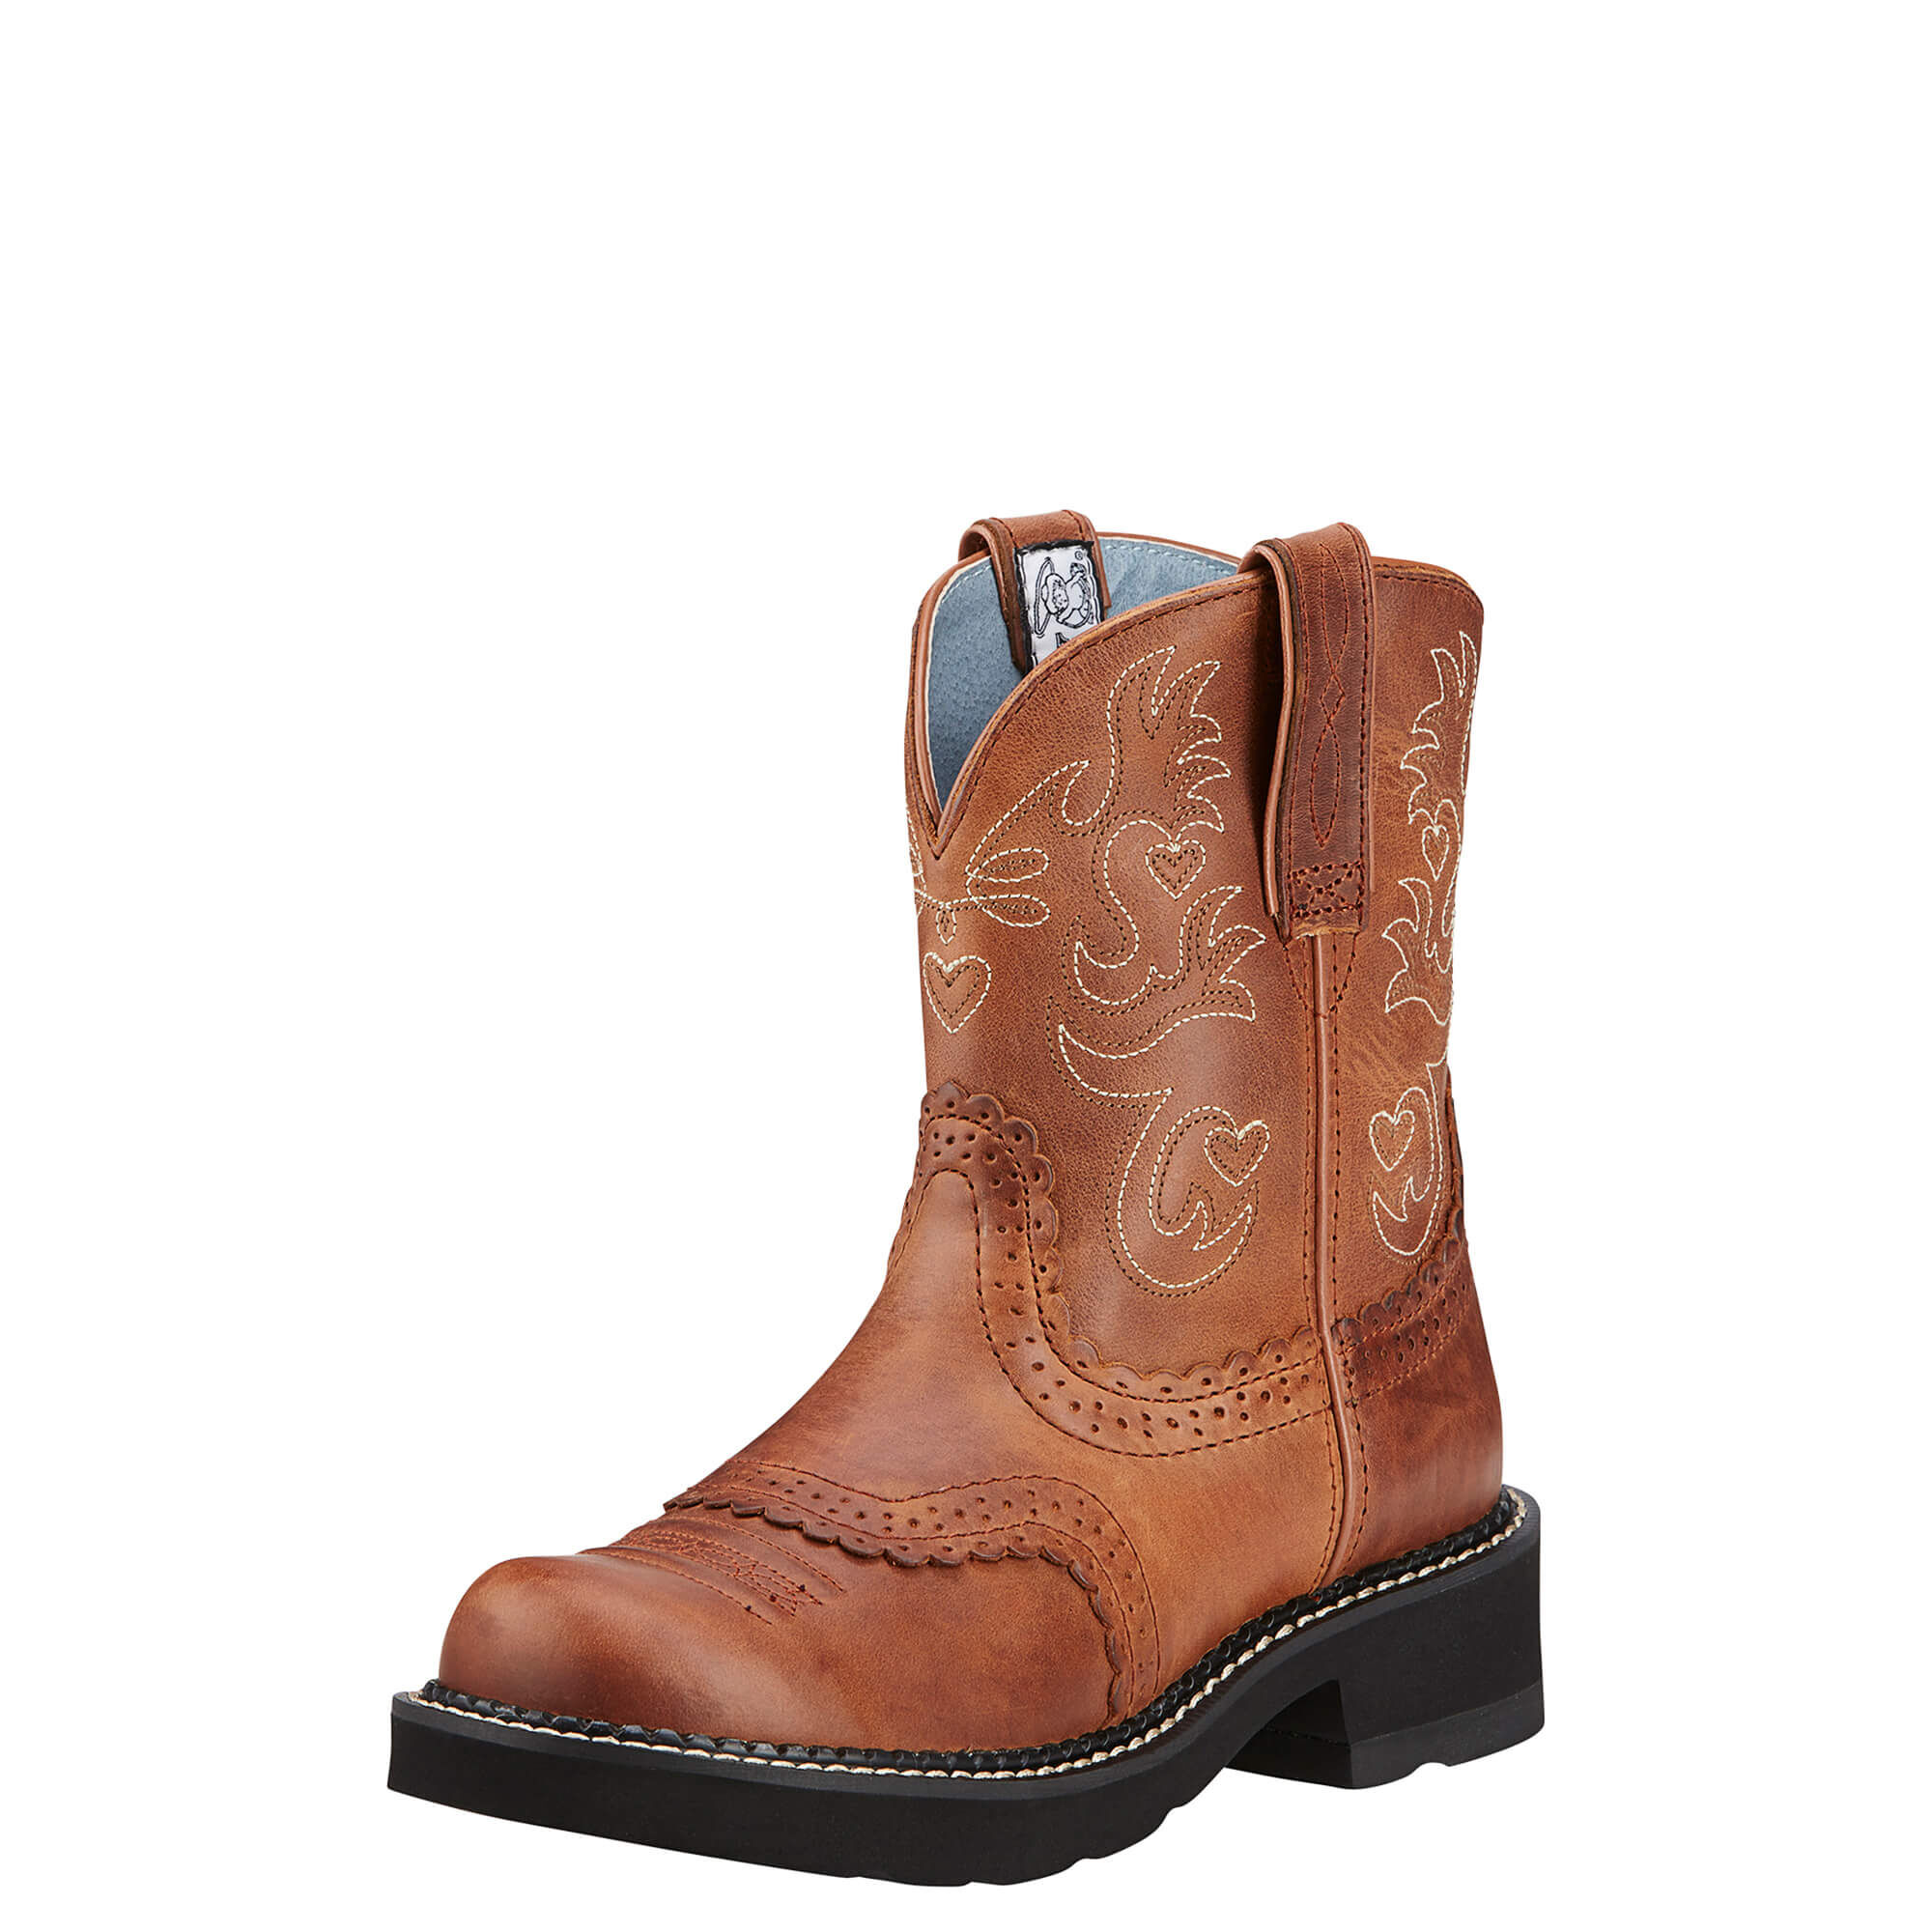 Fatbaby Saddle Western Boot | Ariat